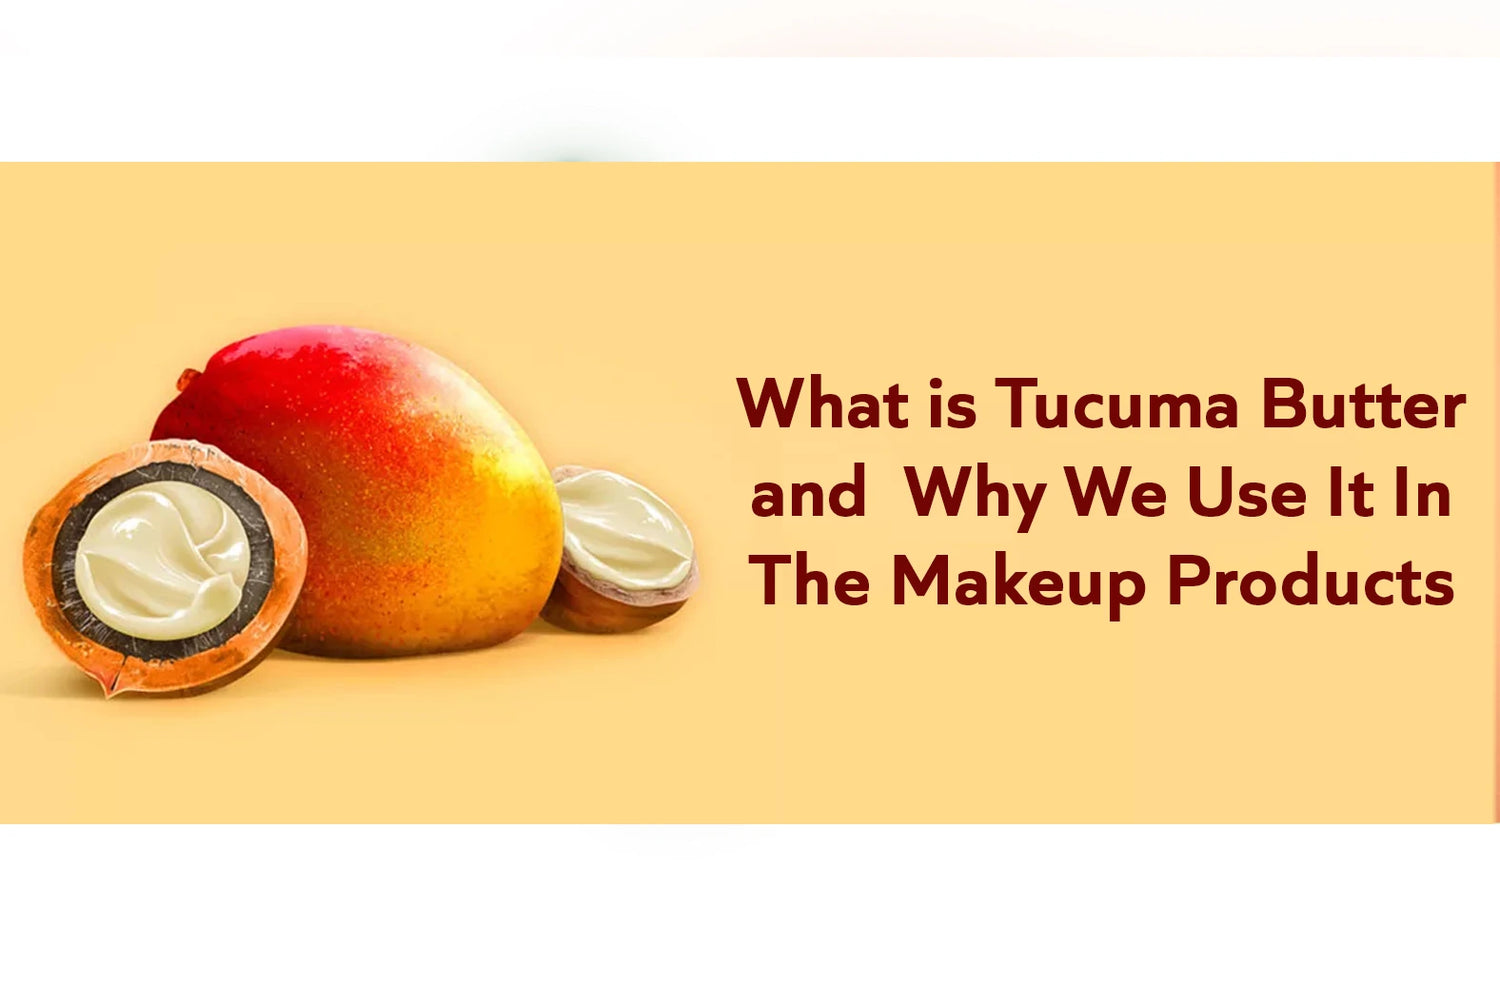 What is Tucuma Butter